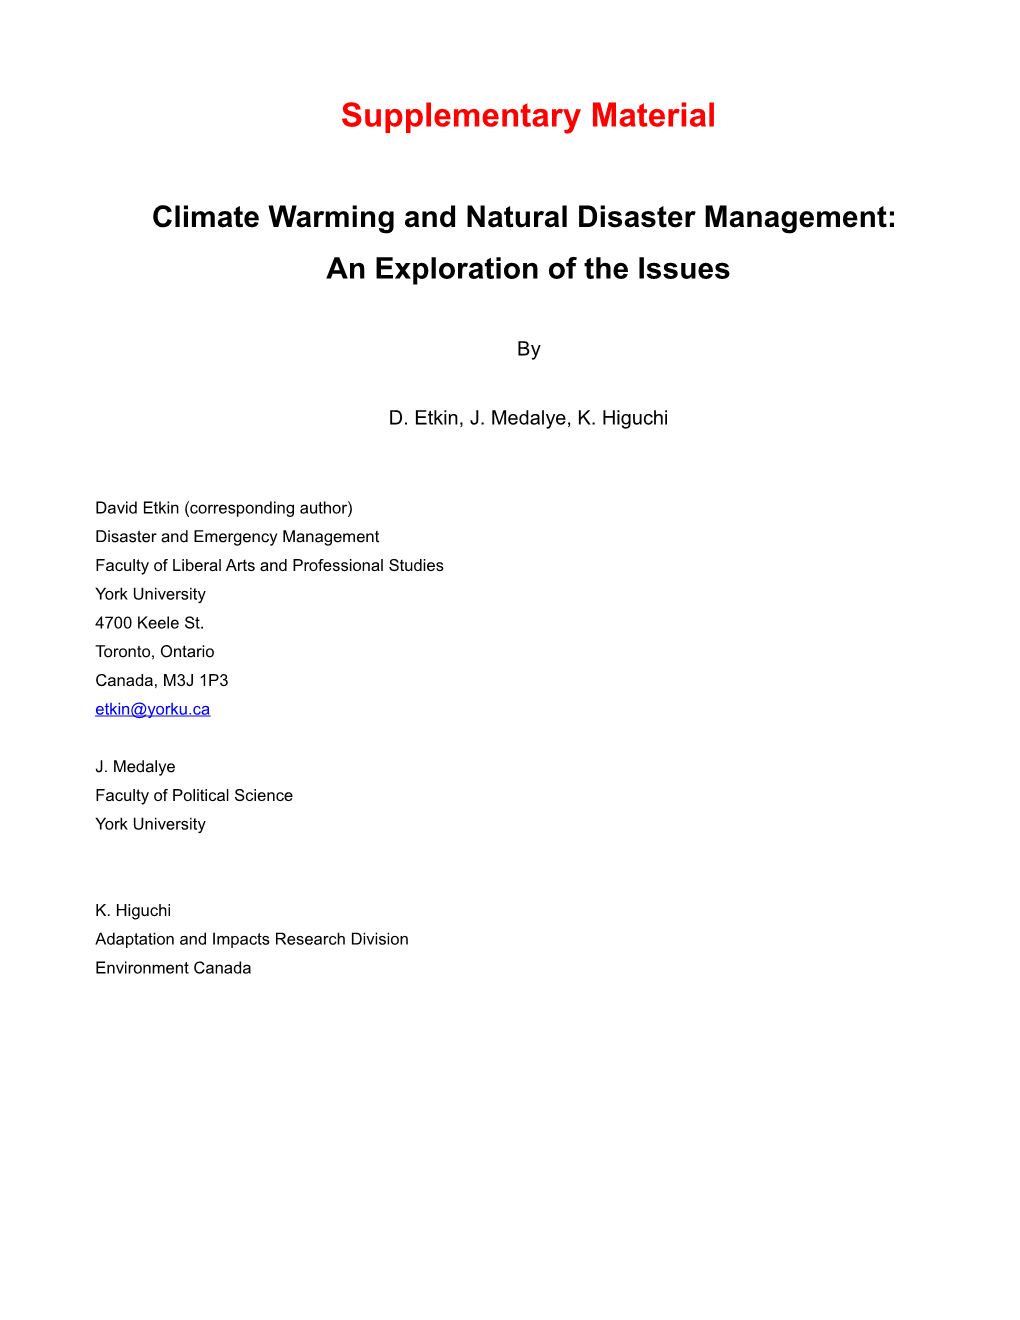 Climate Warming and Natural Disaster Management